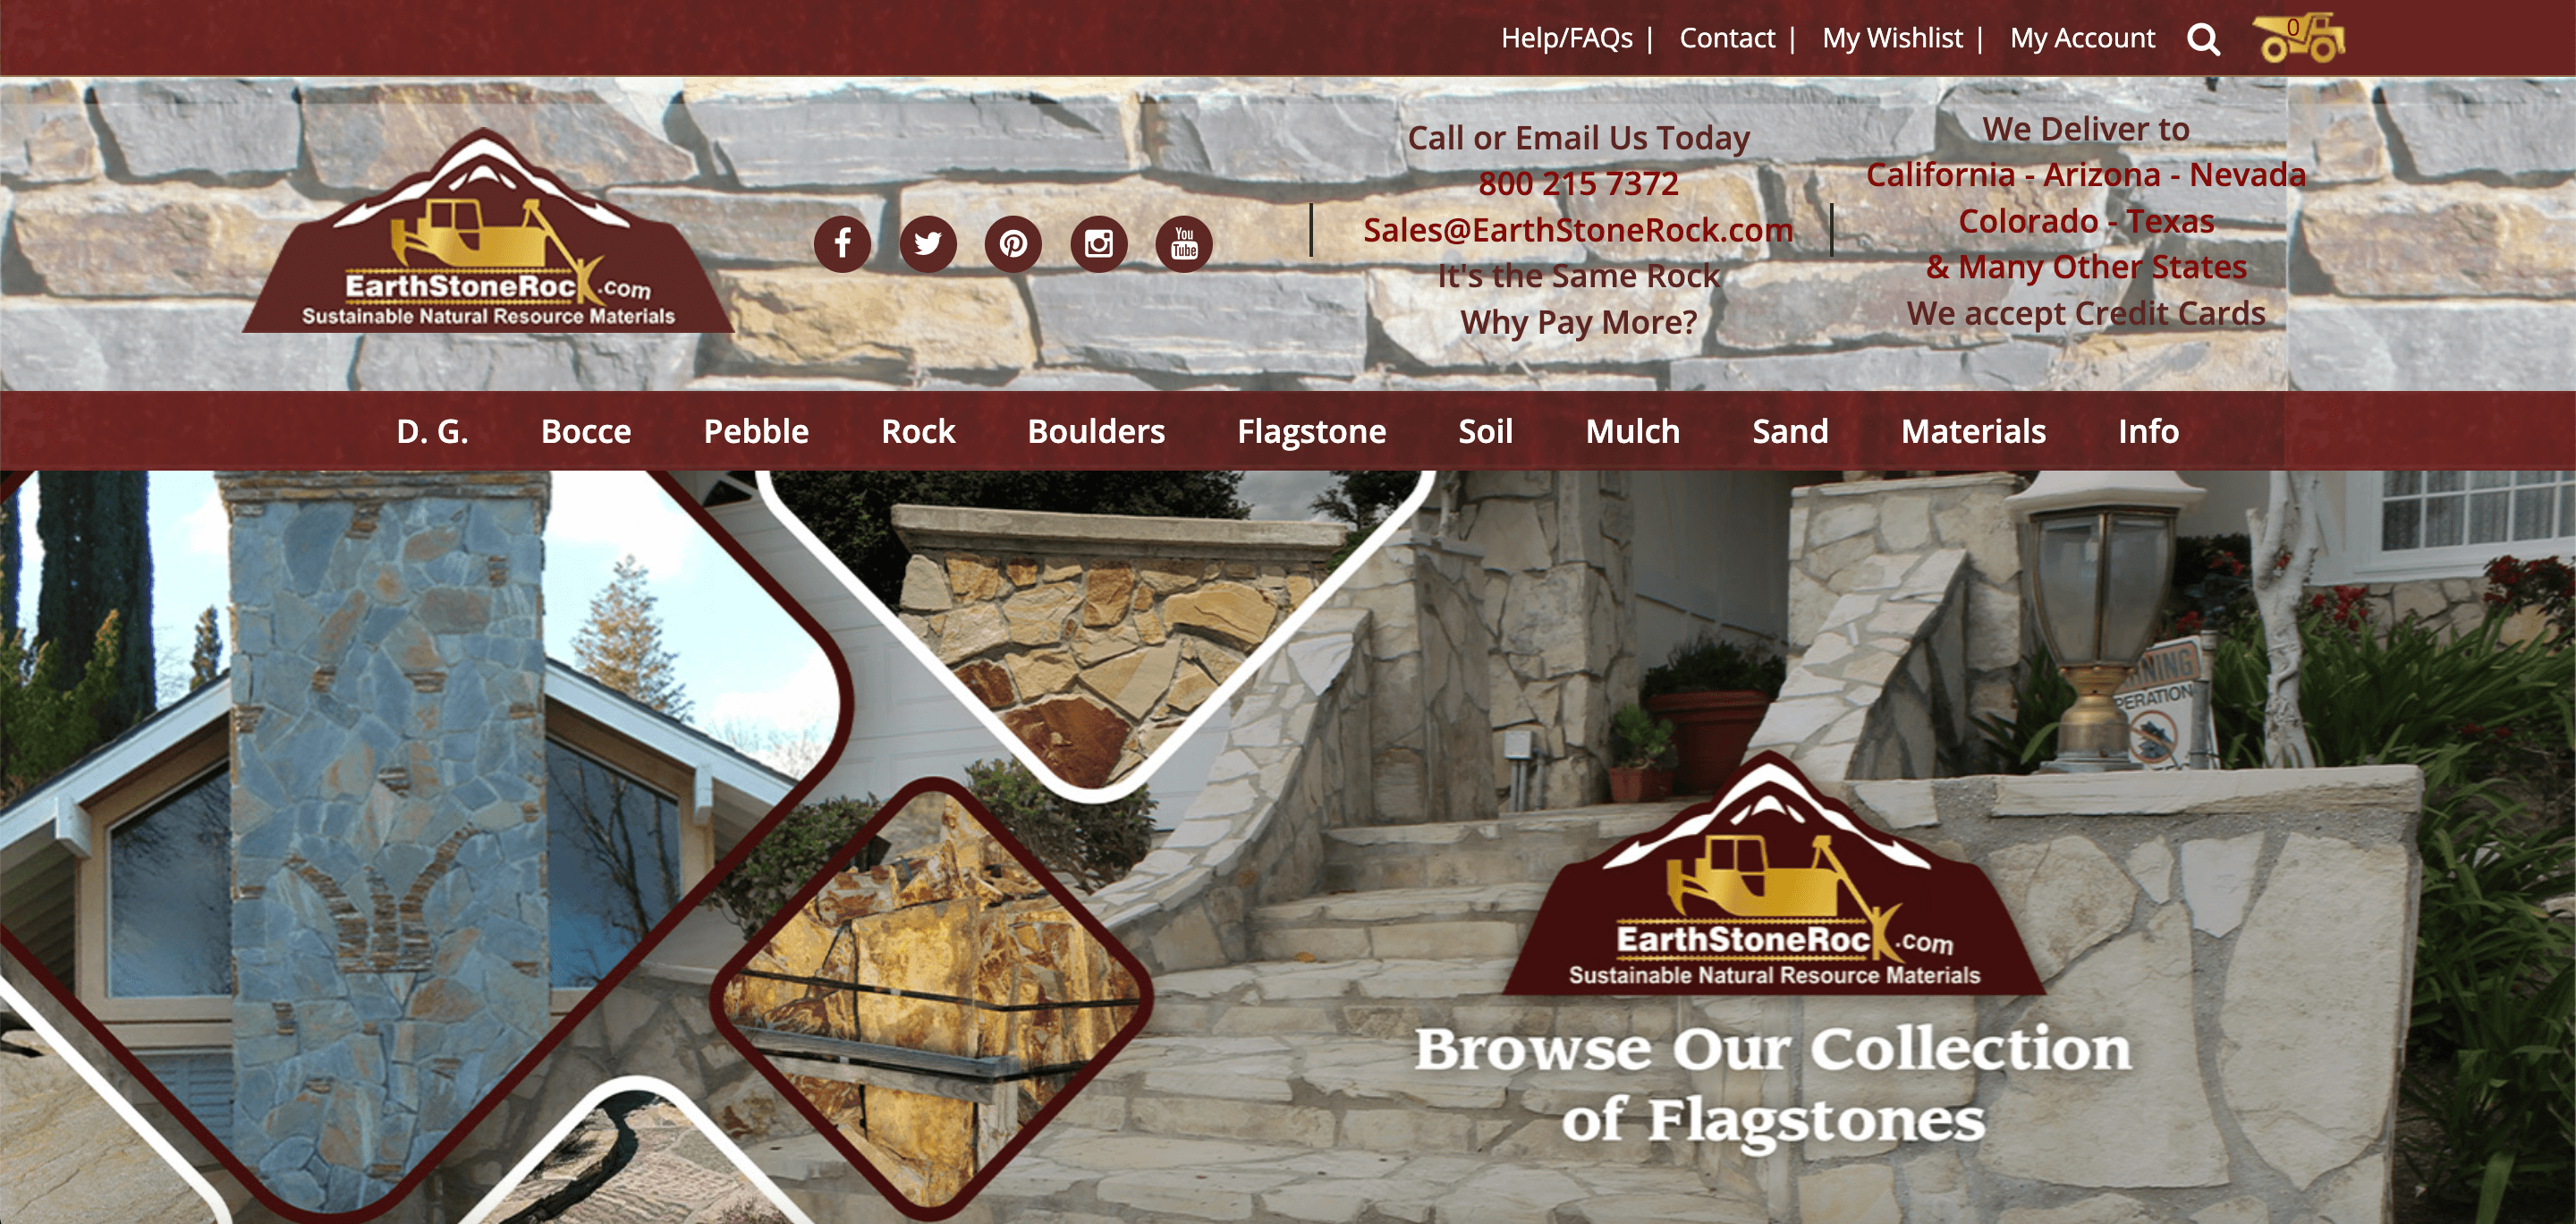 Website for stone and stone products. Earthstonerock.com.